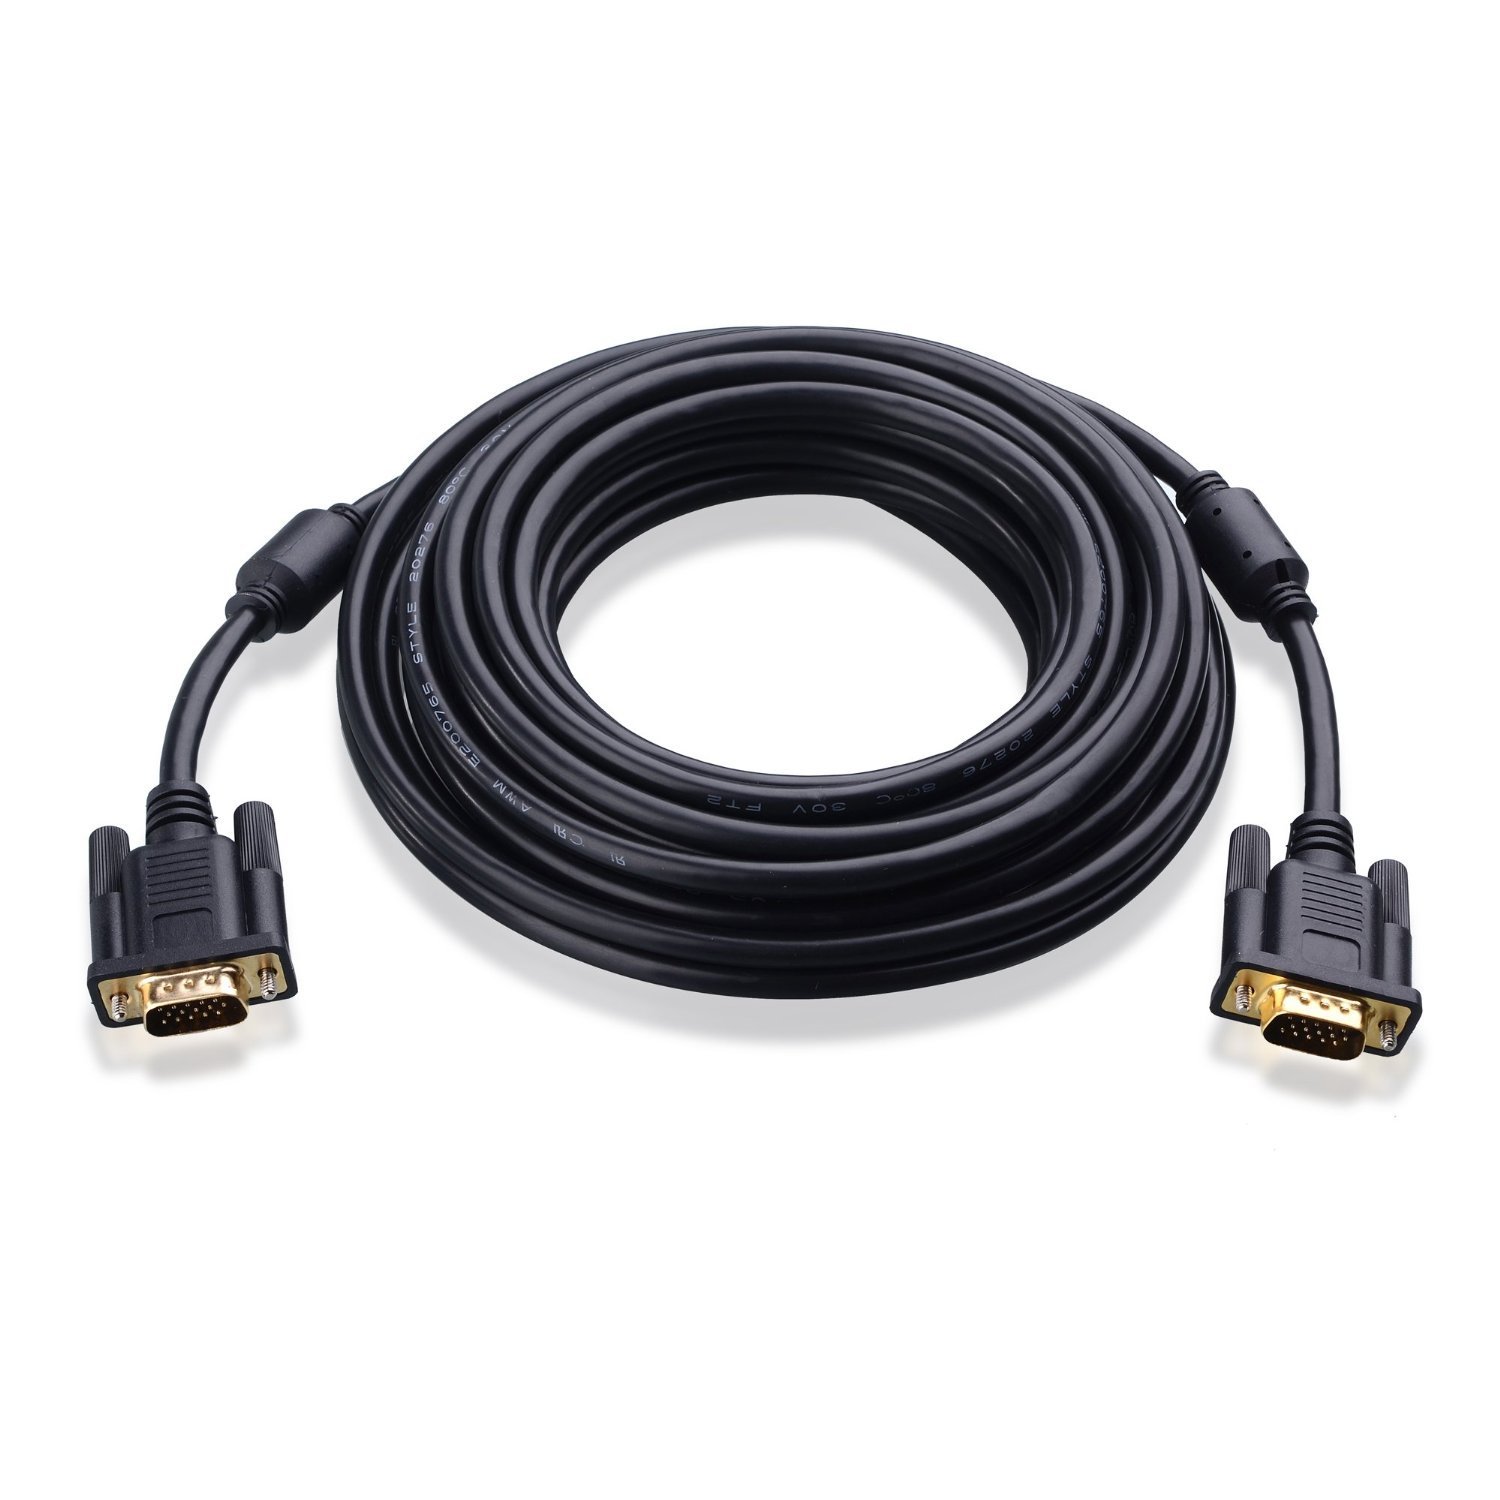 CABLE MATTERS GOLD PLATED VGA MONITOR CABLE WITH  25 FEET .